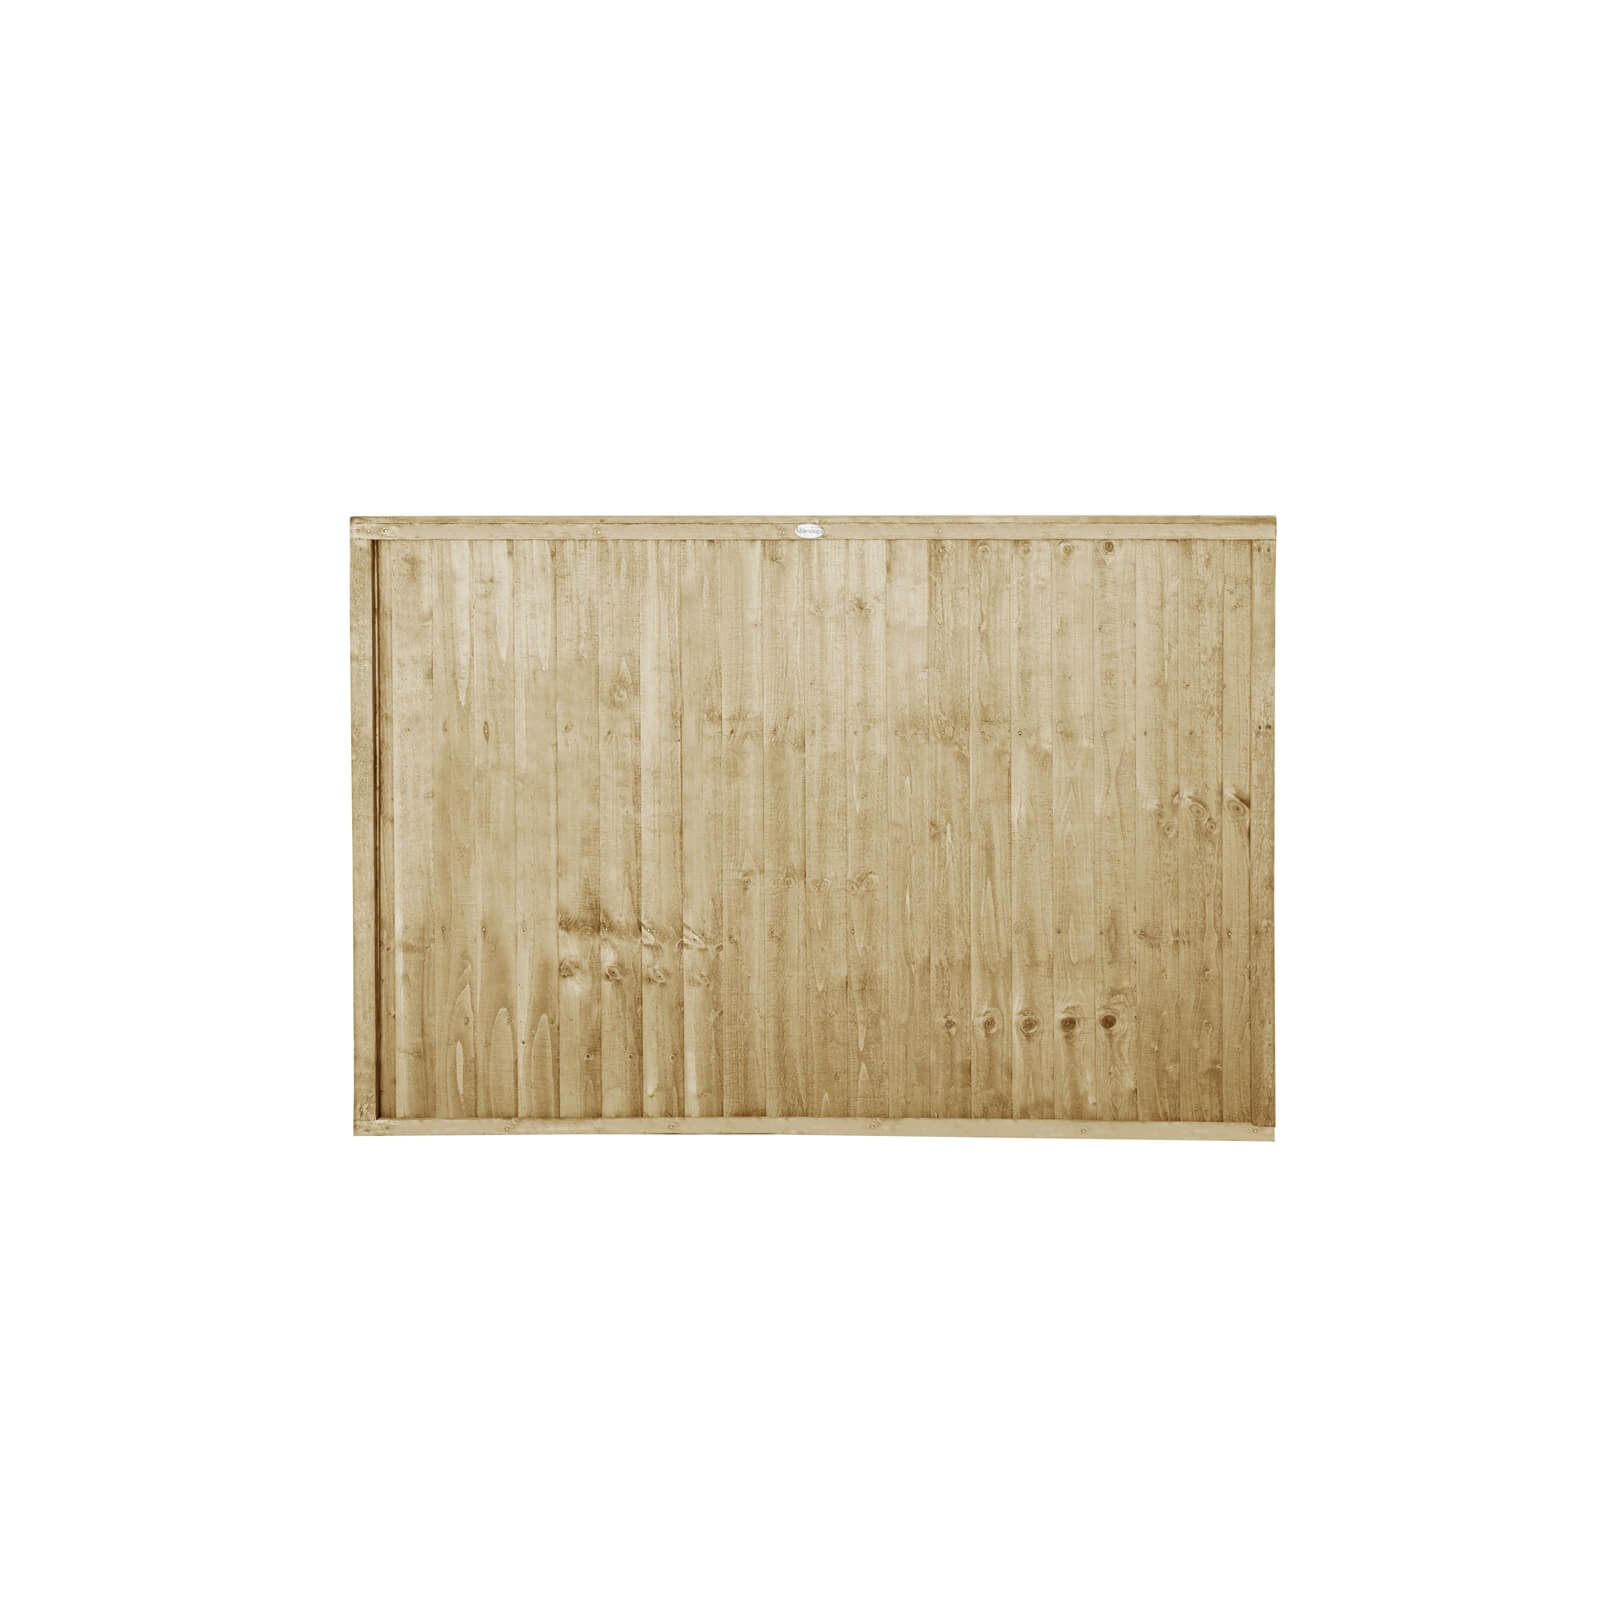 6ft x 4ft (1.83m x 1.22m) Pressure Treated Closeboard Fence Panel - Pack of 3